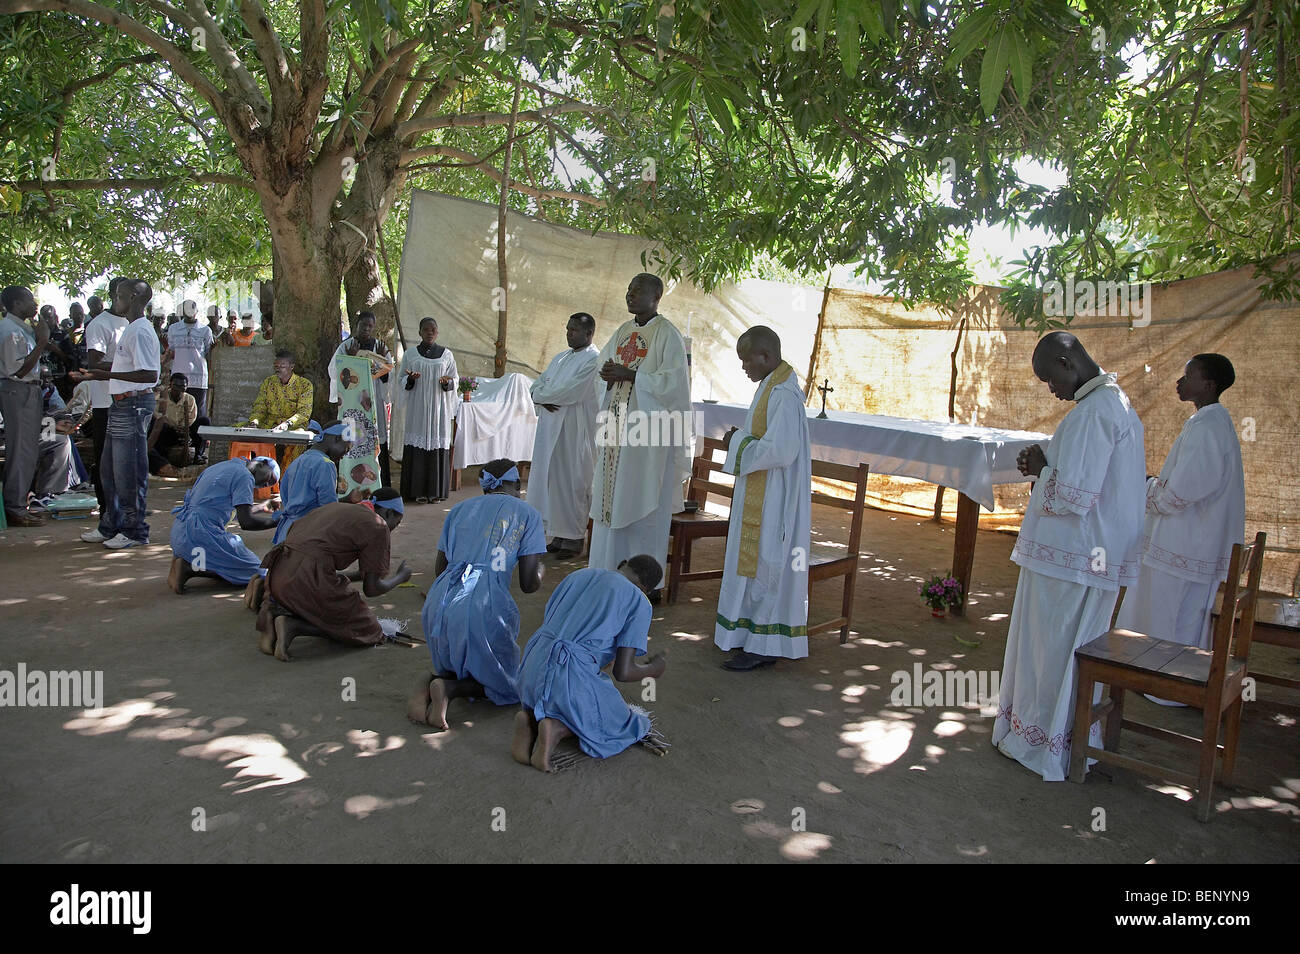 SOUTH SUDAN Saint Joseph's Feast day (May 1st) being celebrated by Catholic community in Yei. Stock Photo